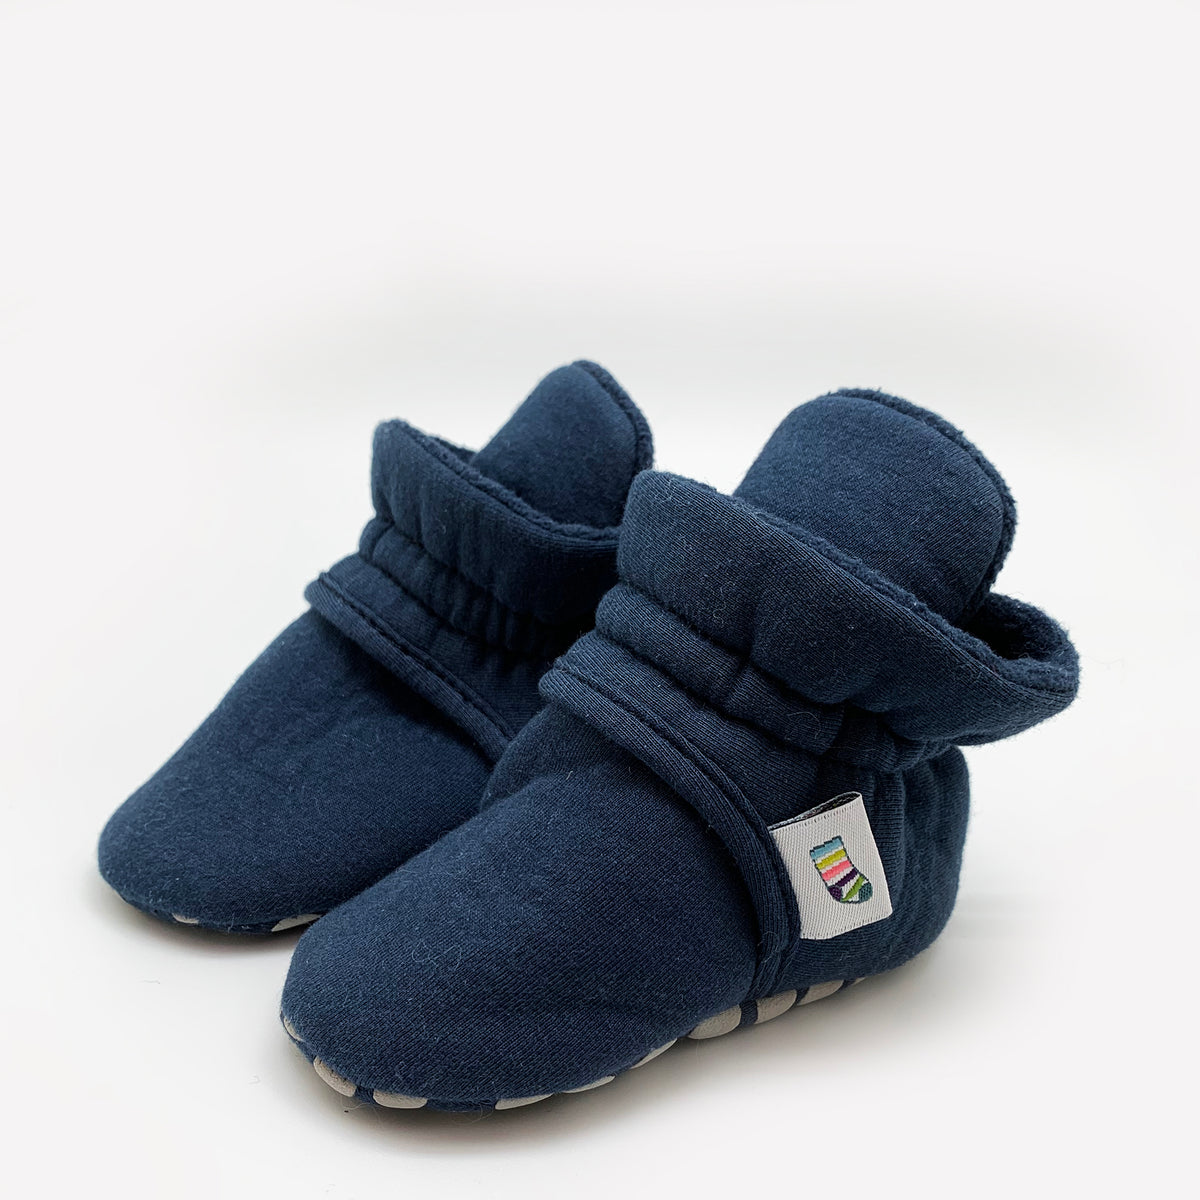 Stay-on, Non-Slip Bootie - Perfect pram Slipper or Baby Carrier boot - Navy